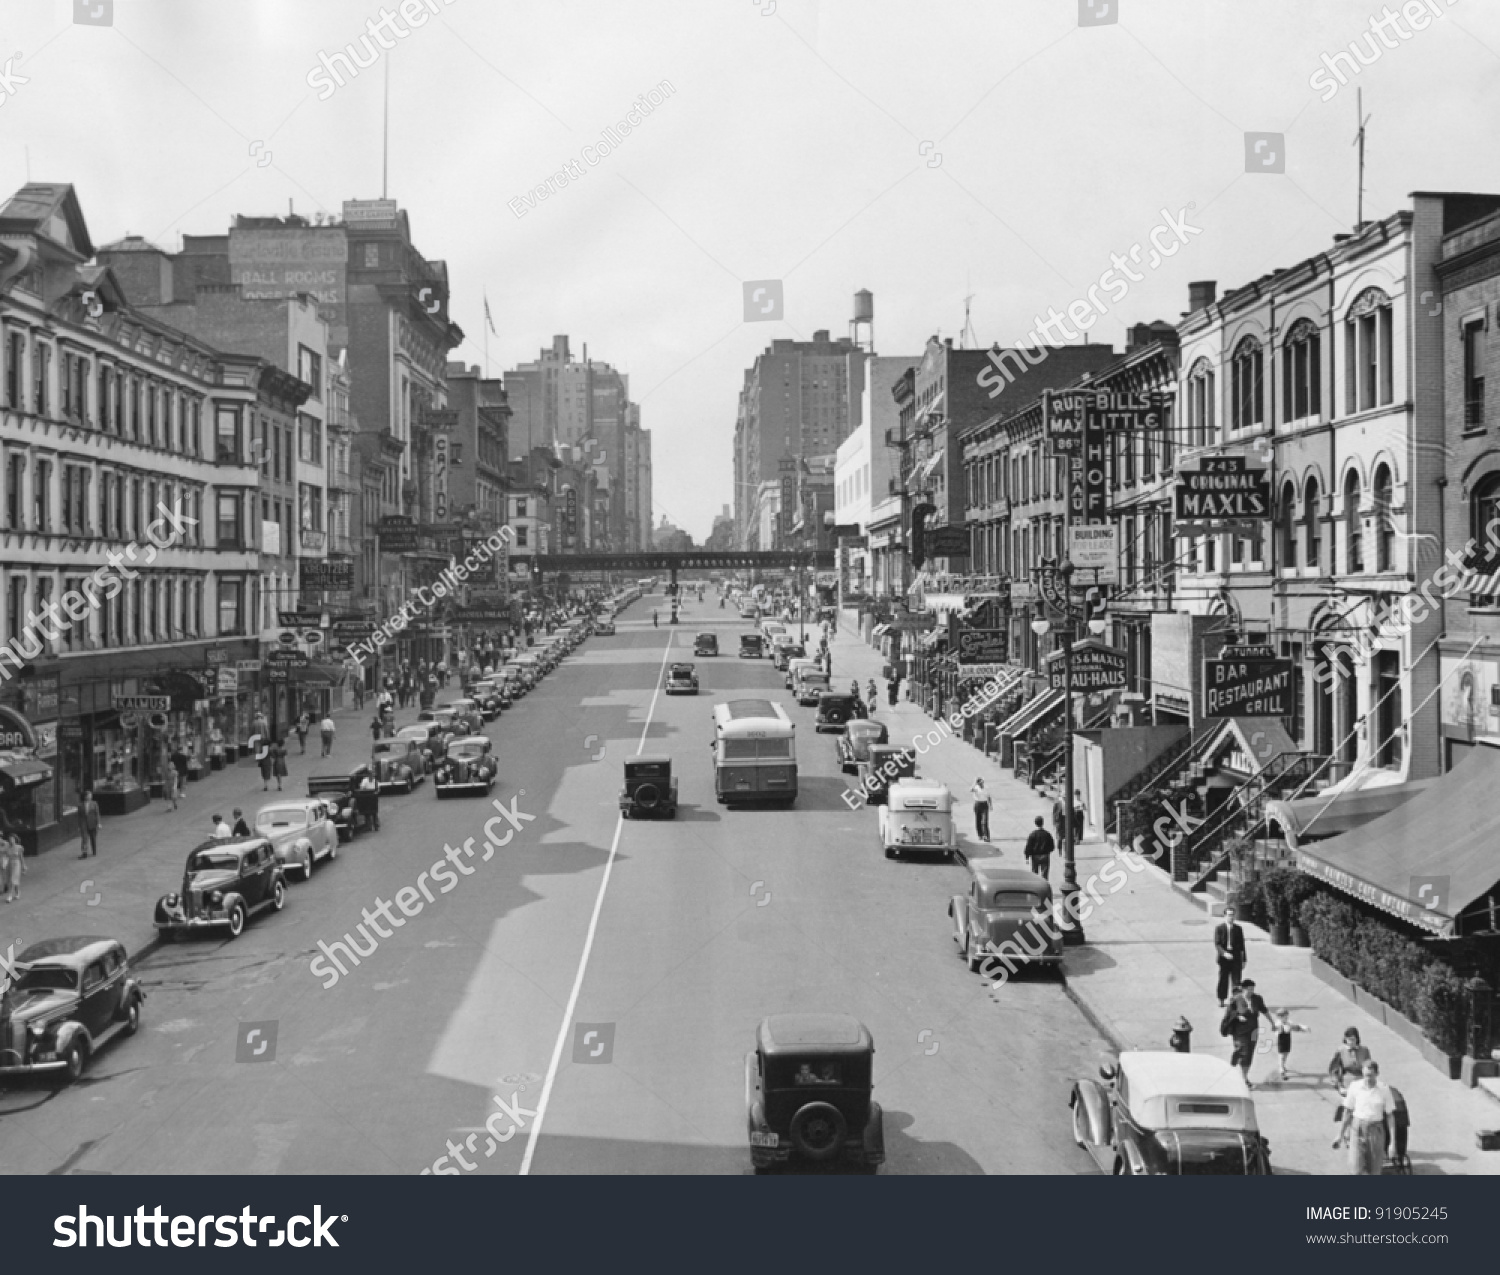 Cityscape Of E. 86th Street In 1930s New York Stock Photo 91905245 ...